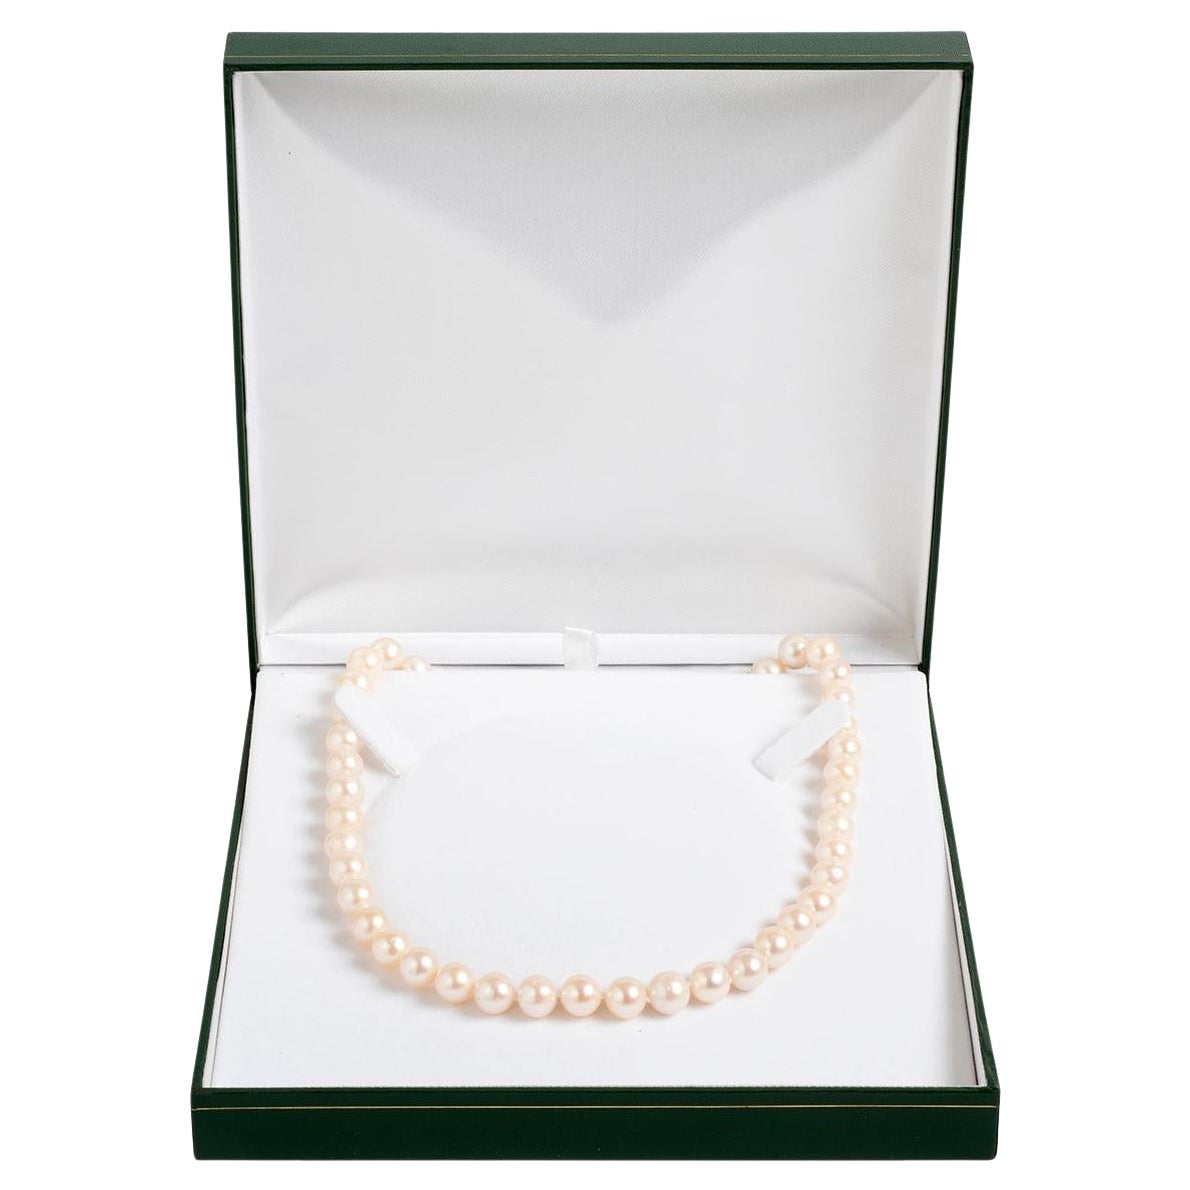 A unique piece within our carefully curated Vintage & Prestige fine jewellery collection, we are delighted to present the following:

A classical piece, this 9 carat clasp of single string of cultured pearls necklace measures 620 mm.